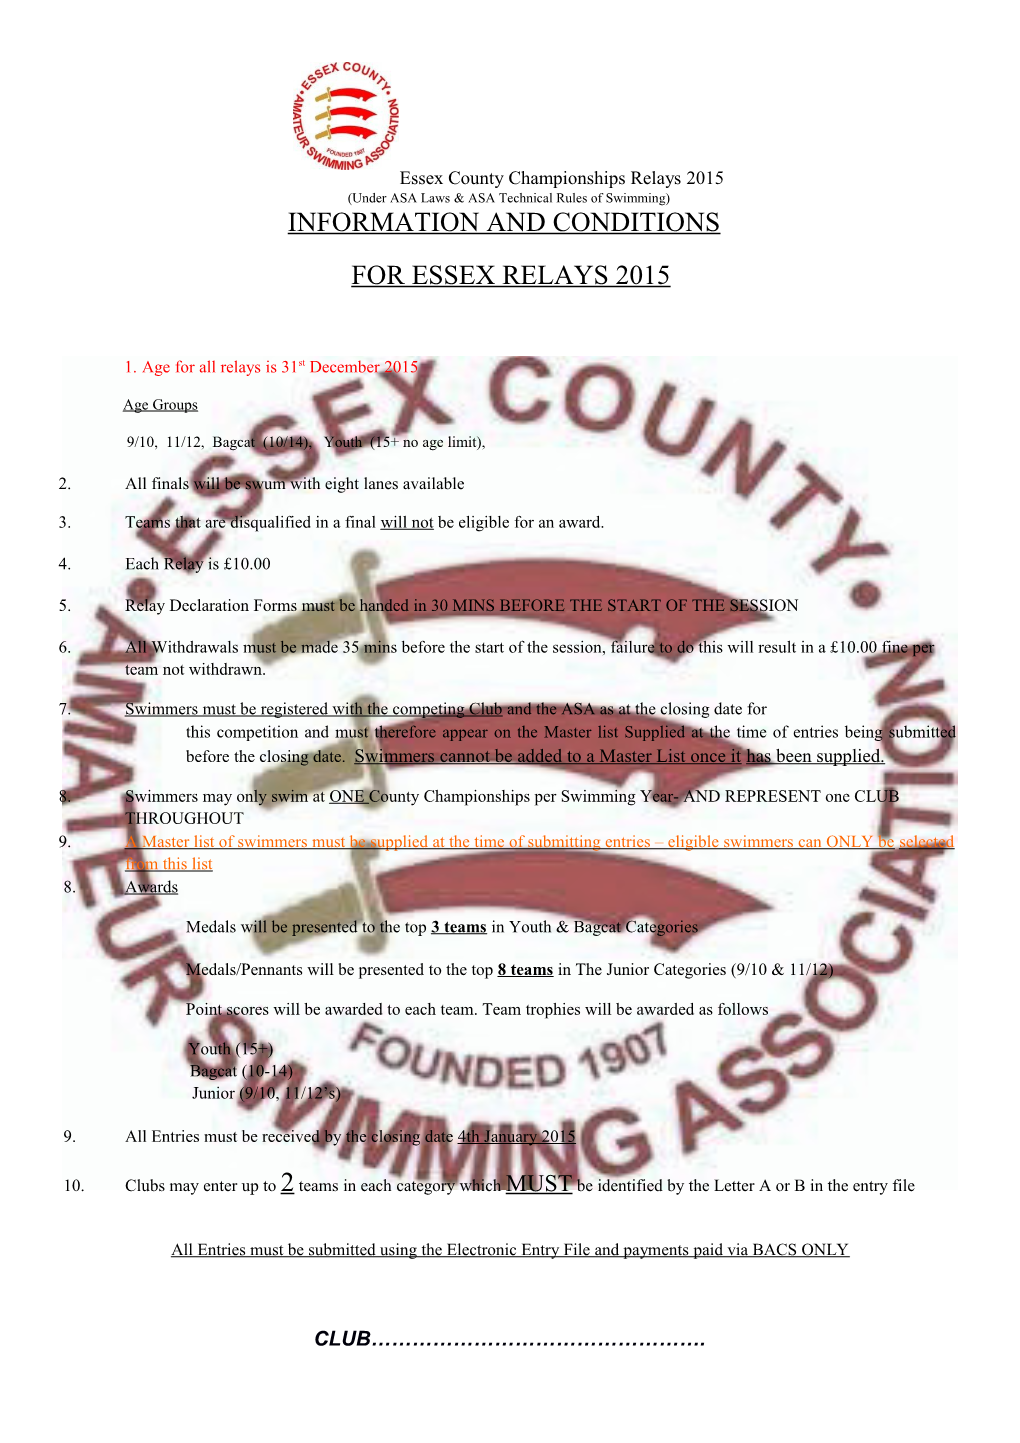 Essex County Championships Relays Weekend 2013